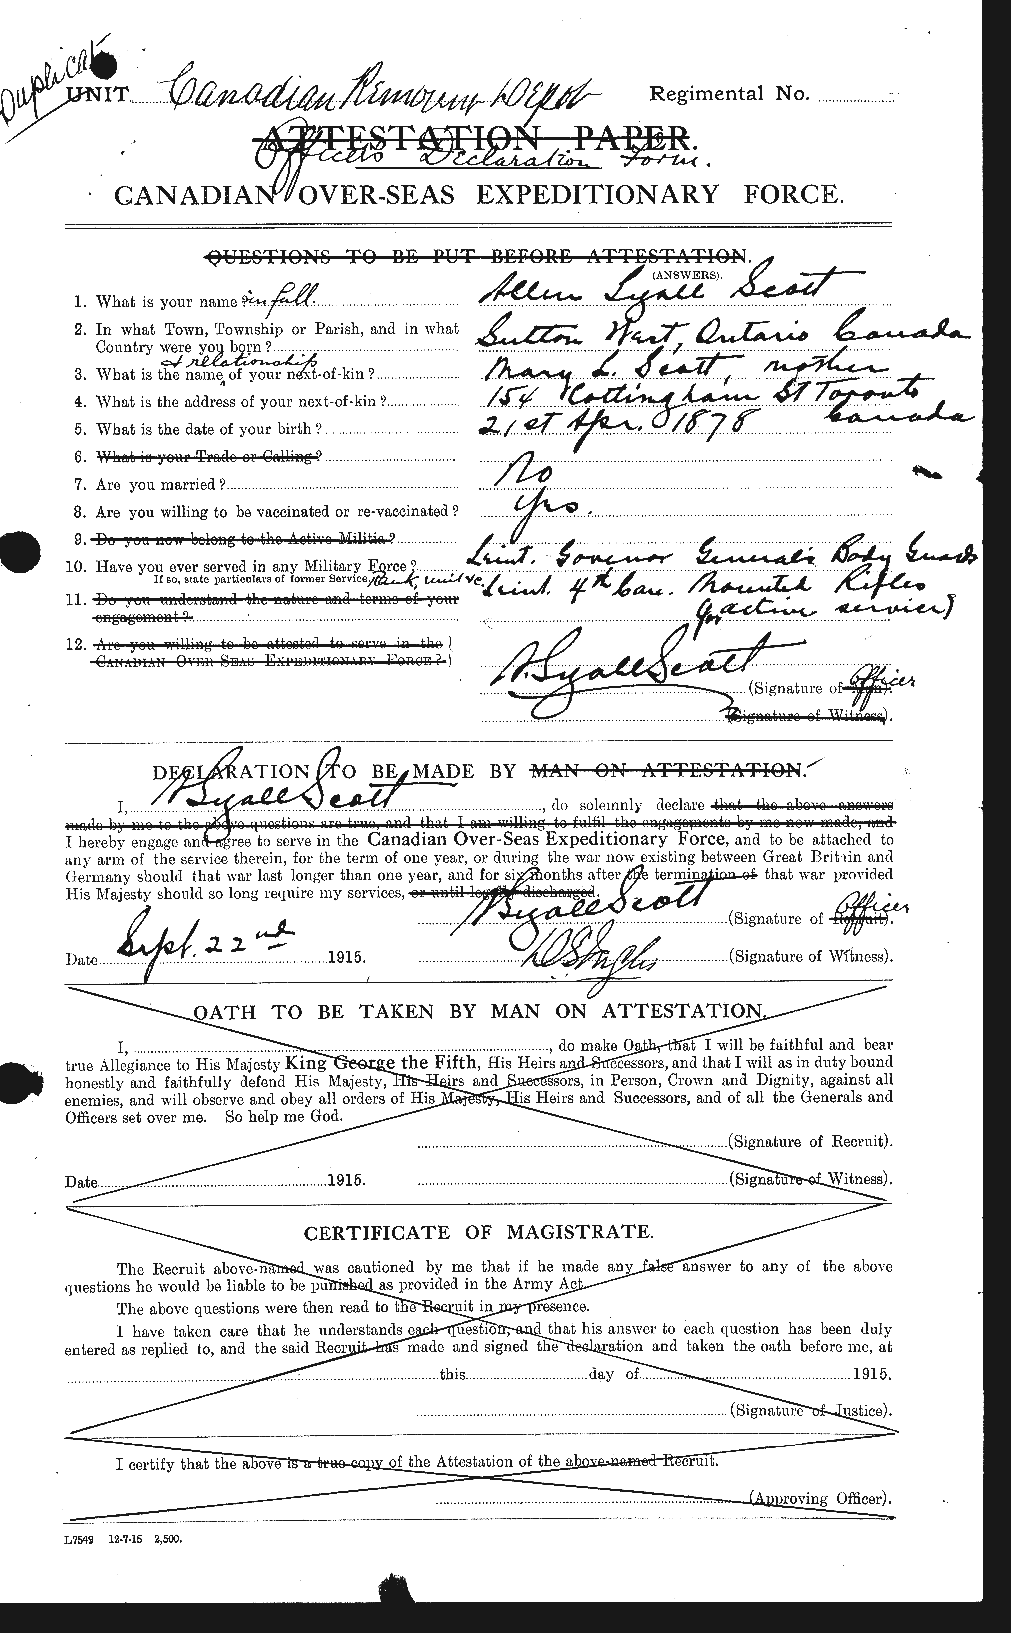 Personnel Records of the First World War - CEF 086571a